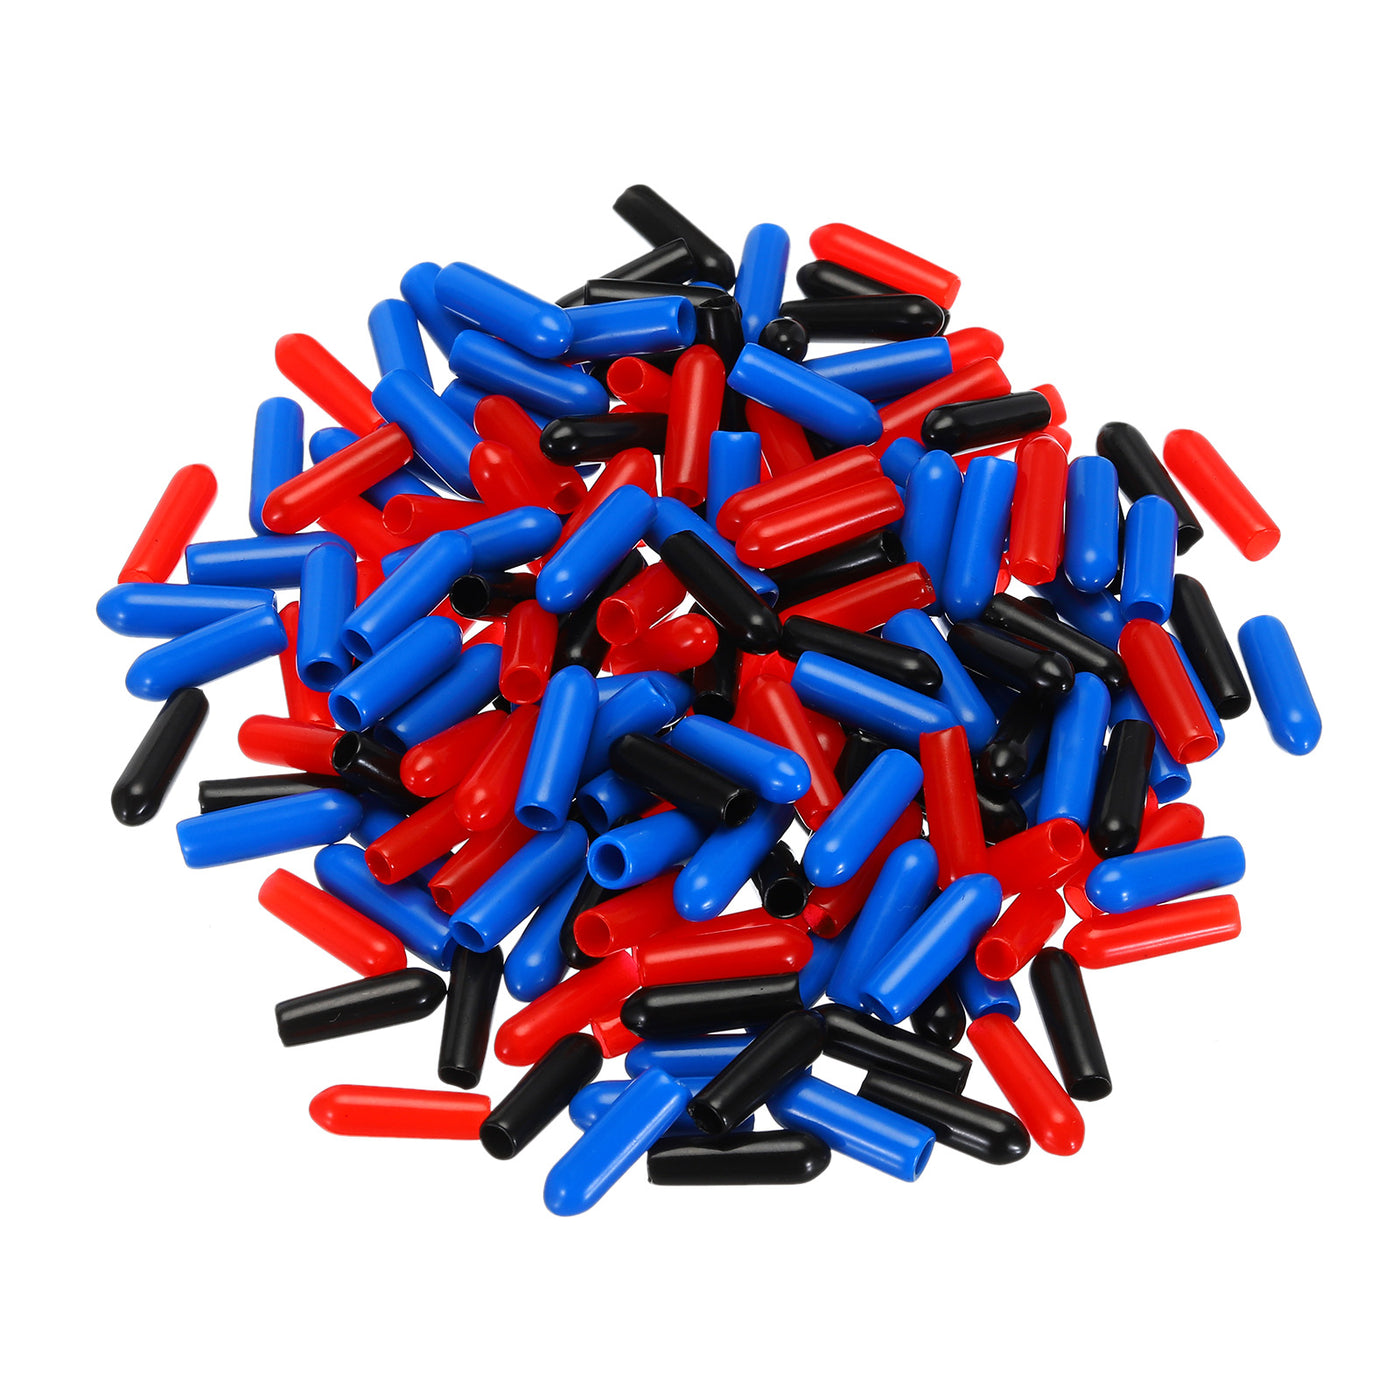 uxcell Uxcell 90pcs Rubber End Caps 3.5mm(1/8") ID Vinyl PVC Round Tube Bolt Cap Cover Screw Thread Protectors, Black Red Blue